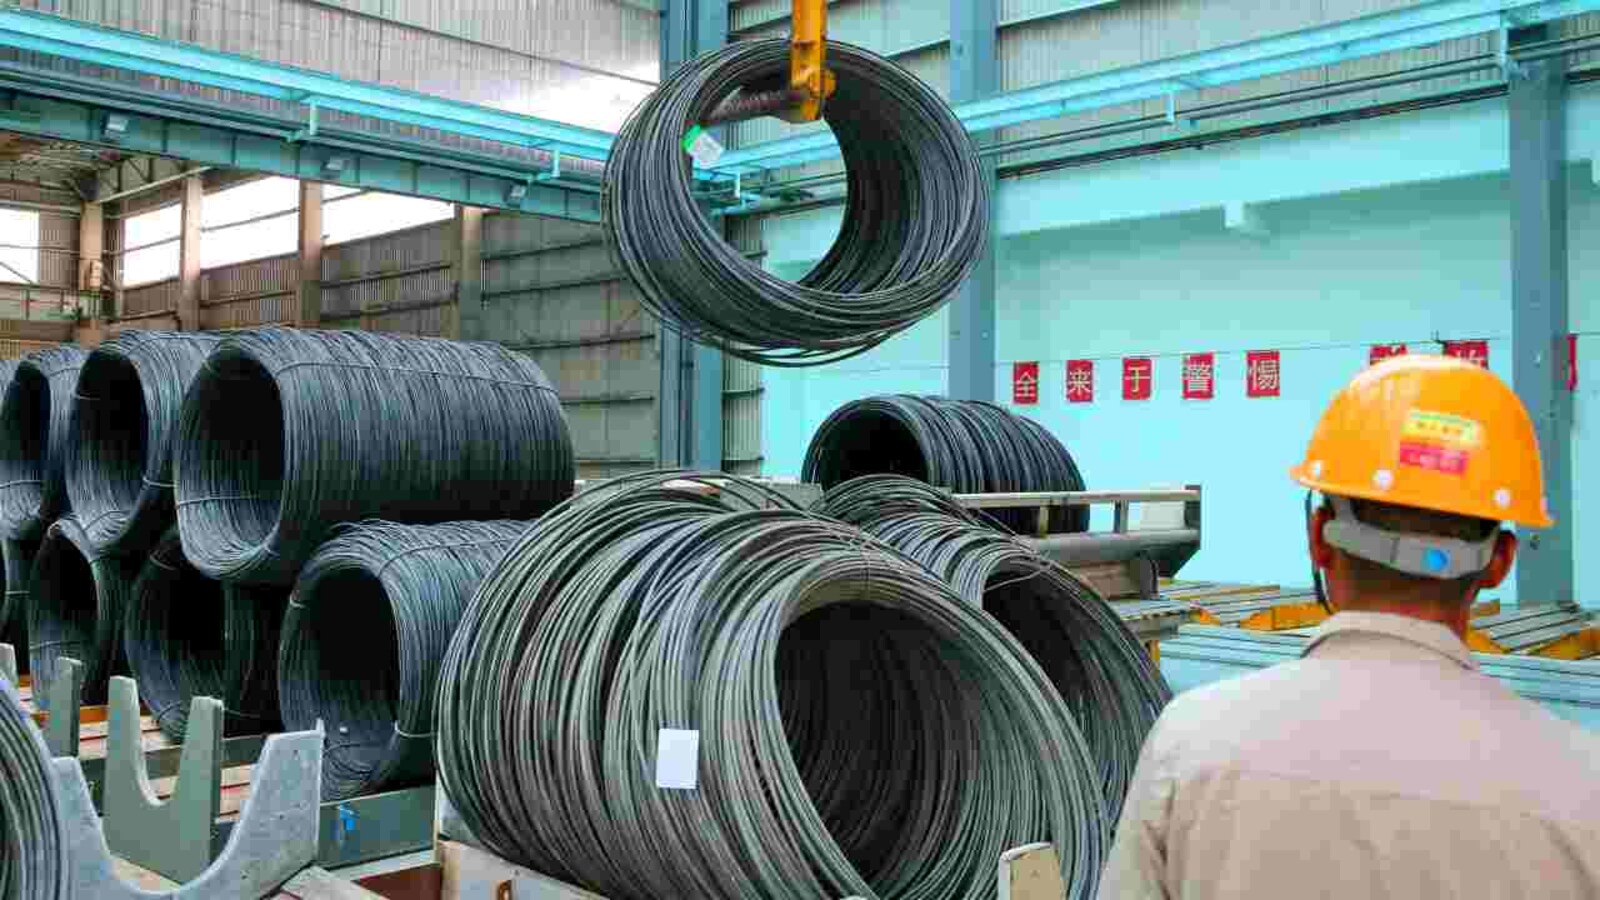 Tata Steel most downgraded stock over last quarter, but analysts spot  silver lining